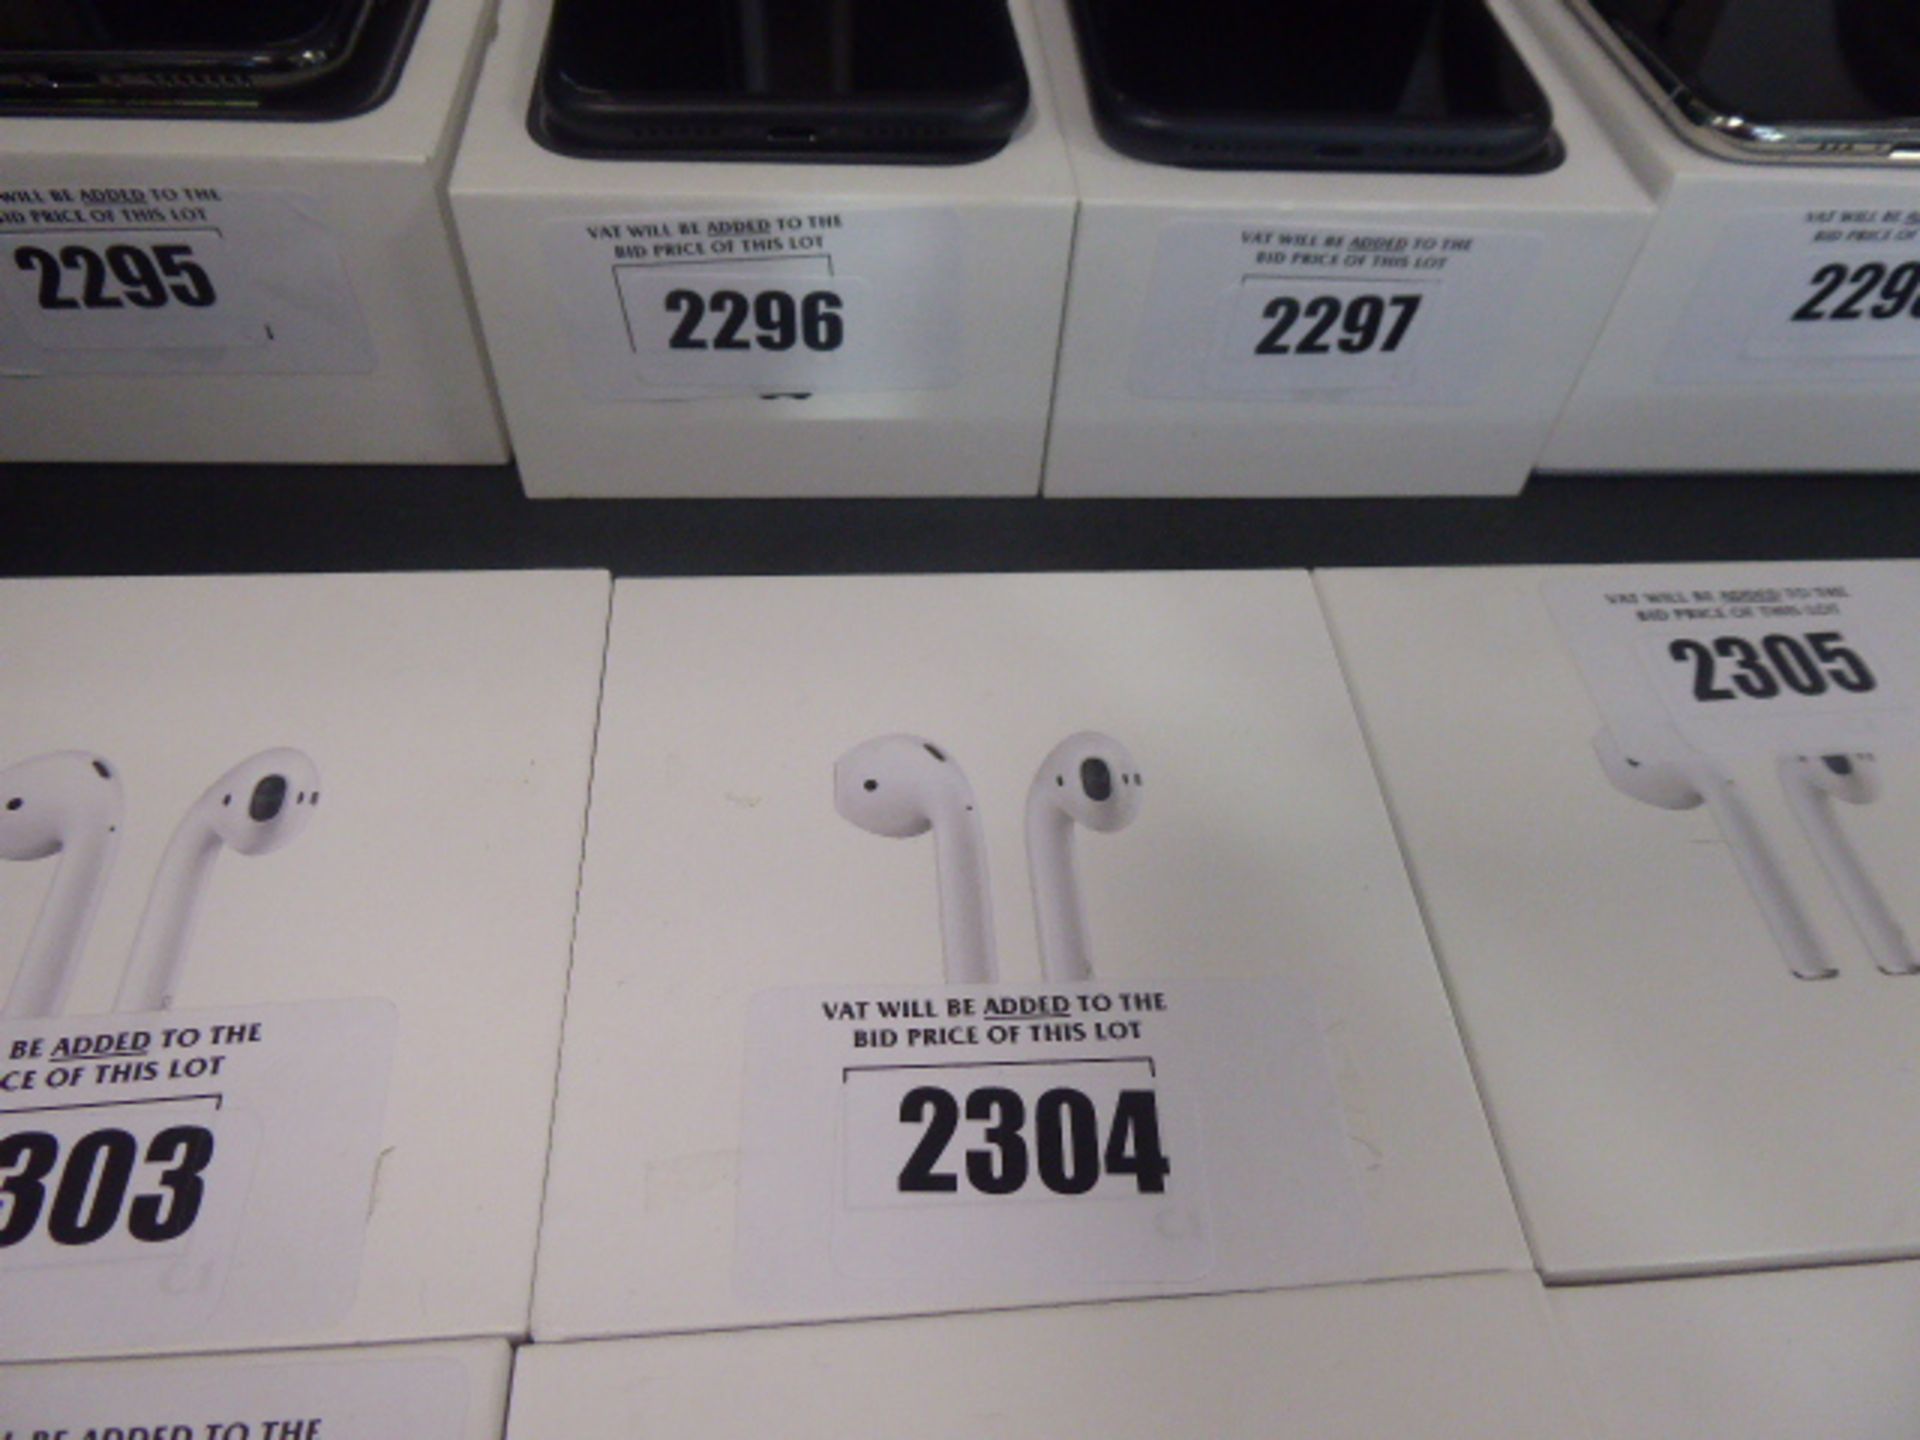 Apple Airpods (2nd gen) with charging case and box